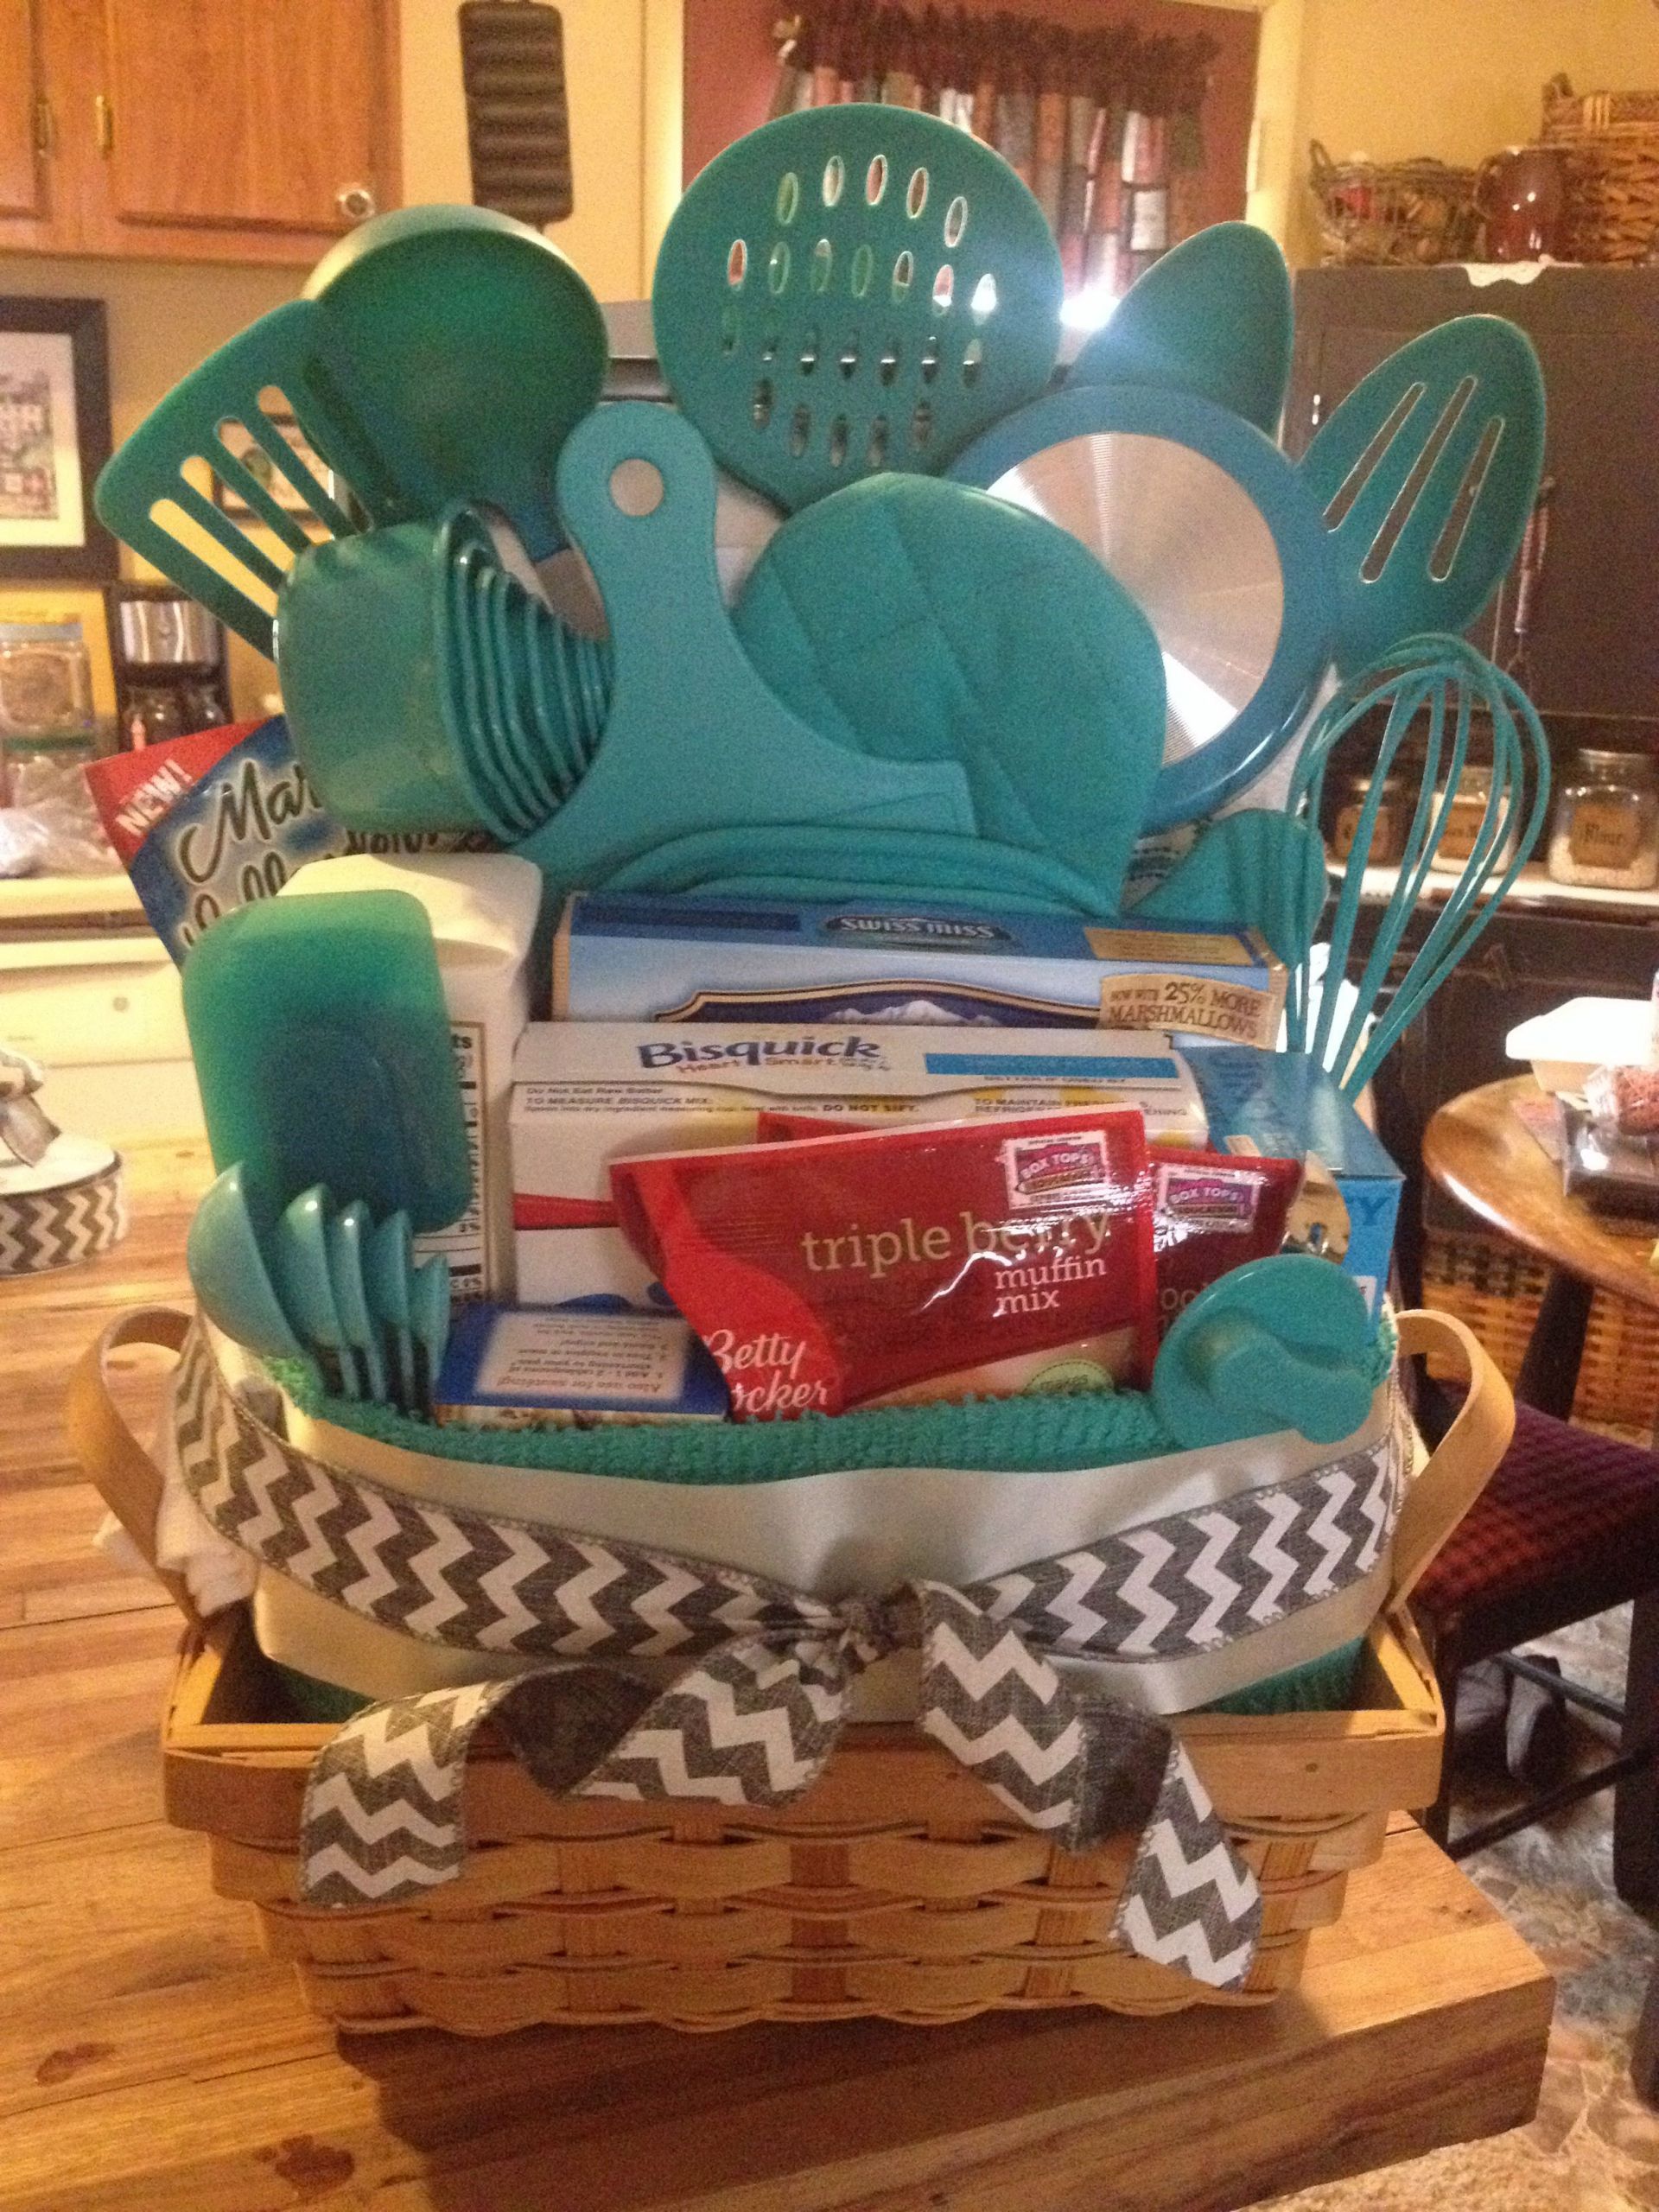 Kitchen Themed Gift Basket Ideas
 My household shower decorations ts Made by my lovely